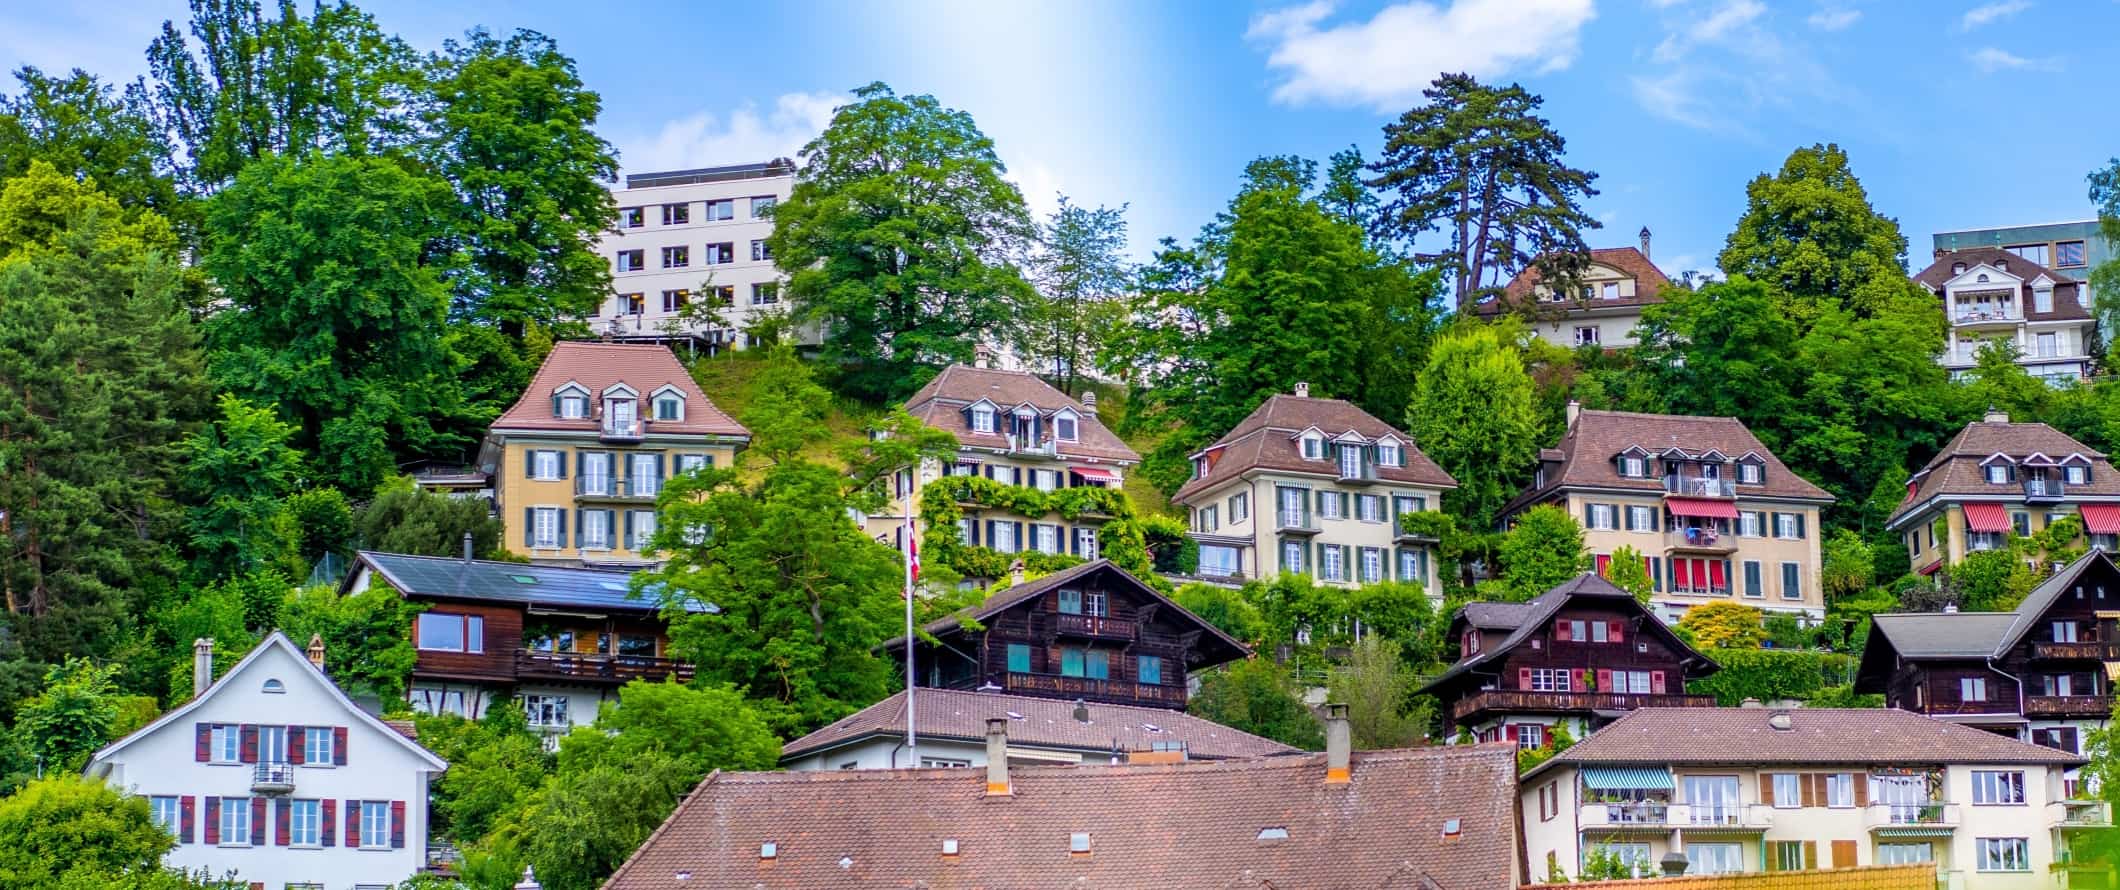 Colorful houses surrounded by trees, set into a hill in Bern, Switzerland